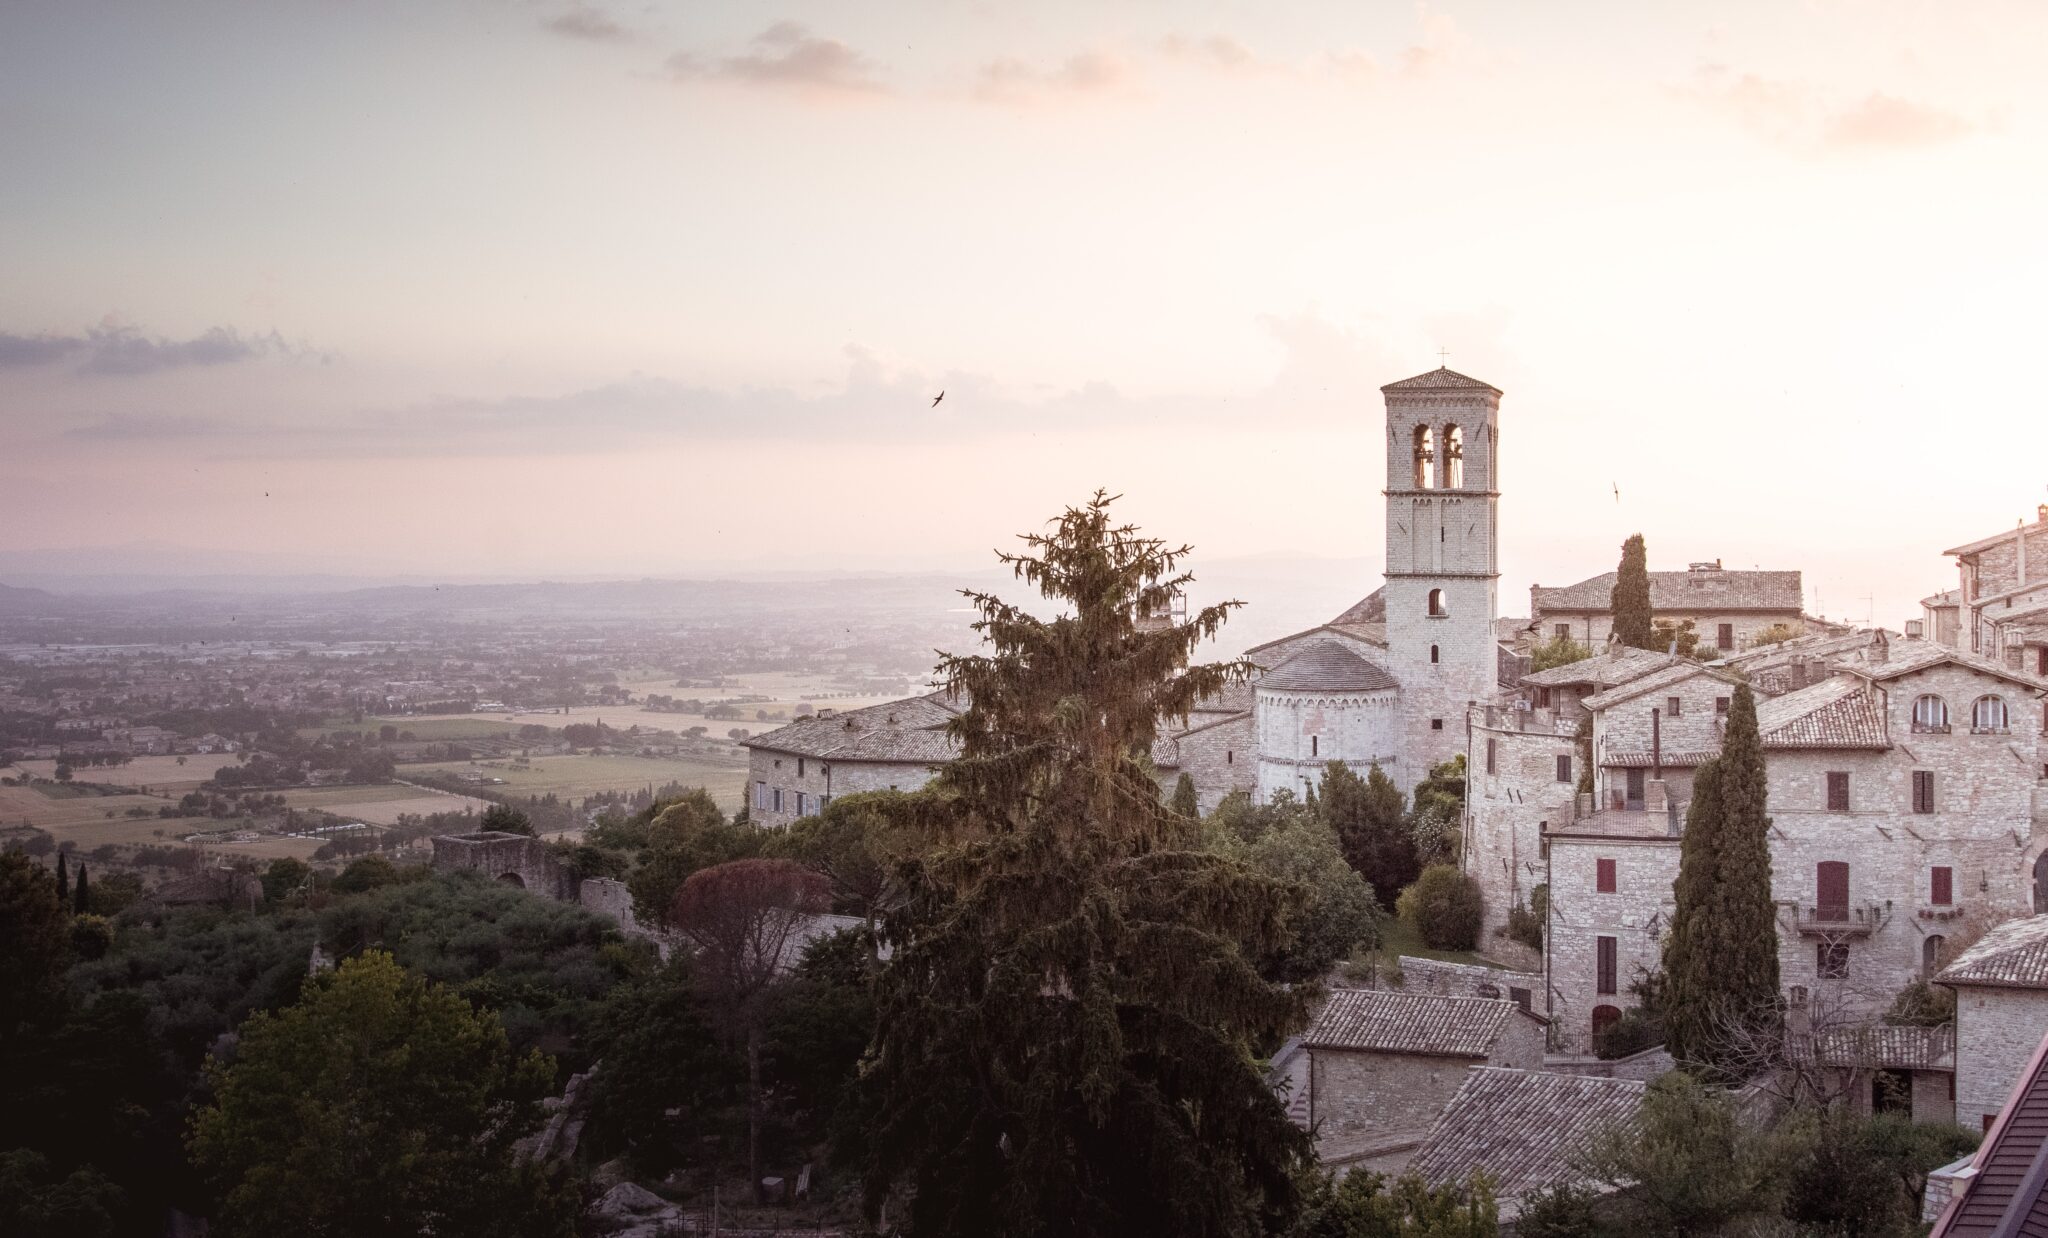 Assisi | Photo by Lachlan Gowen on Unsplash